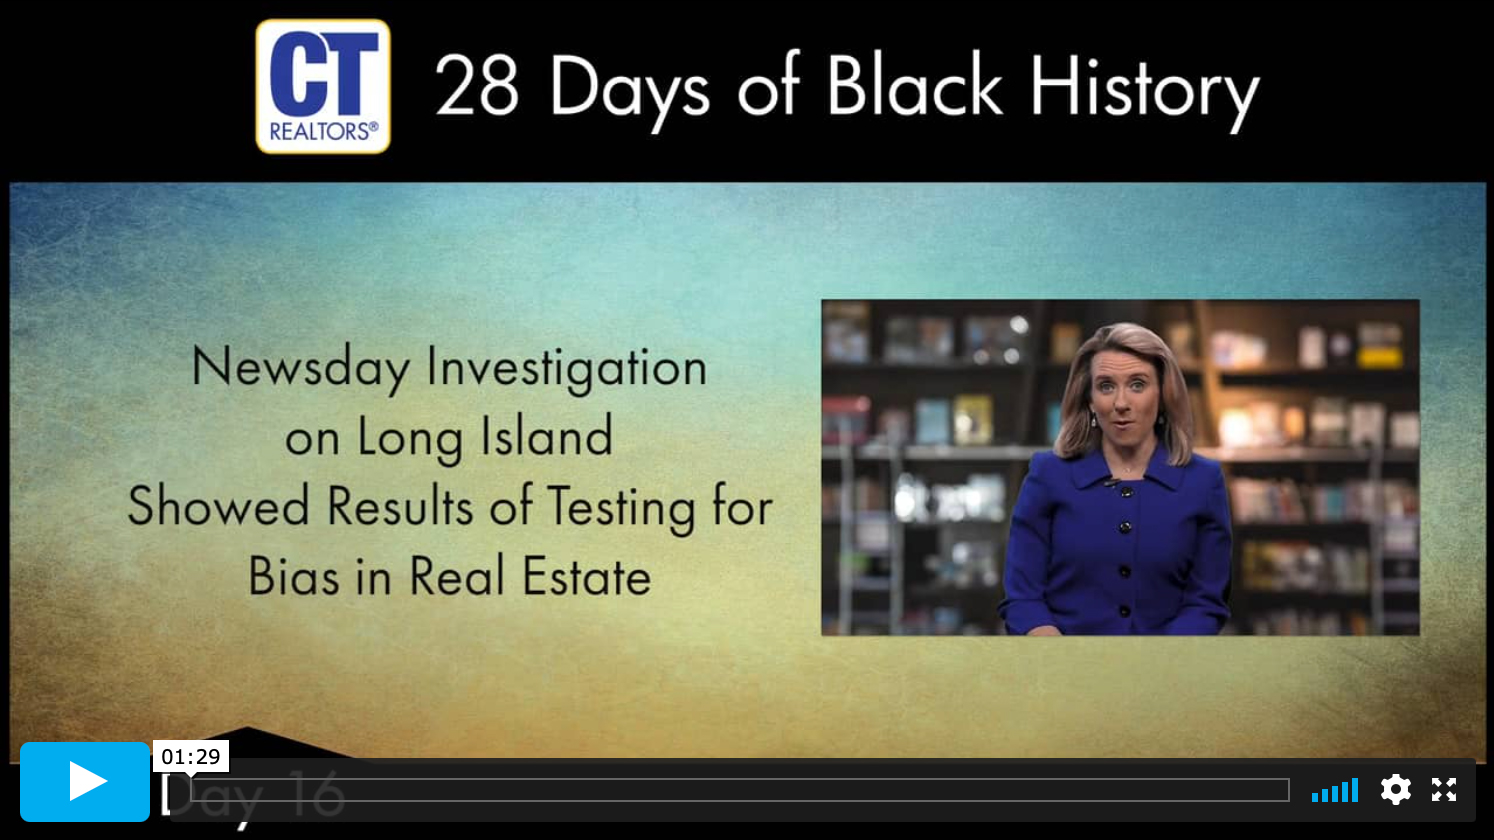 Video - 28 Days of Black History Day 16